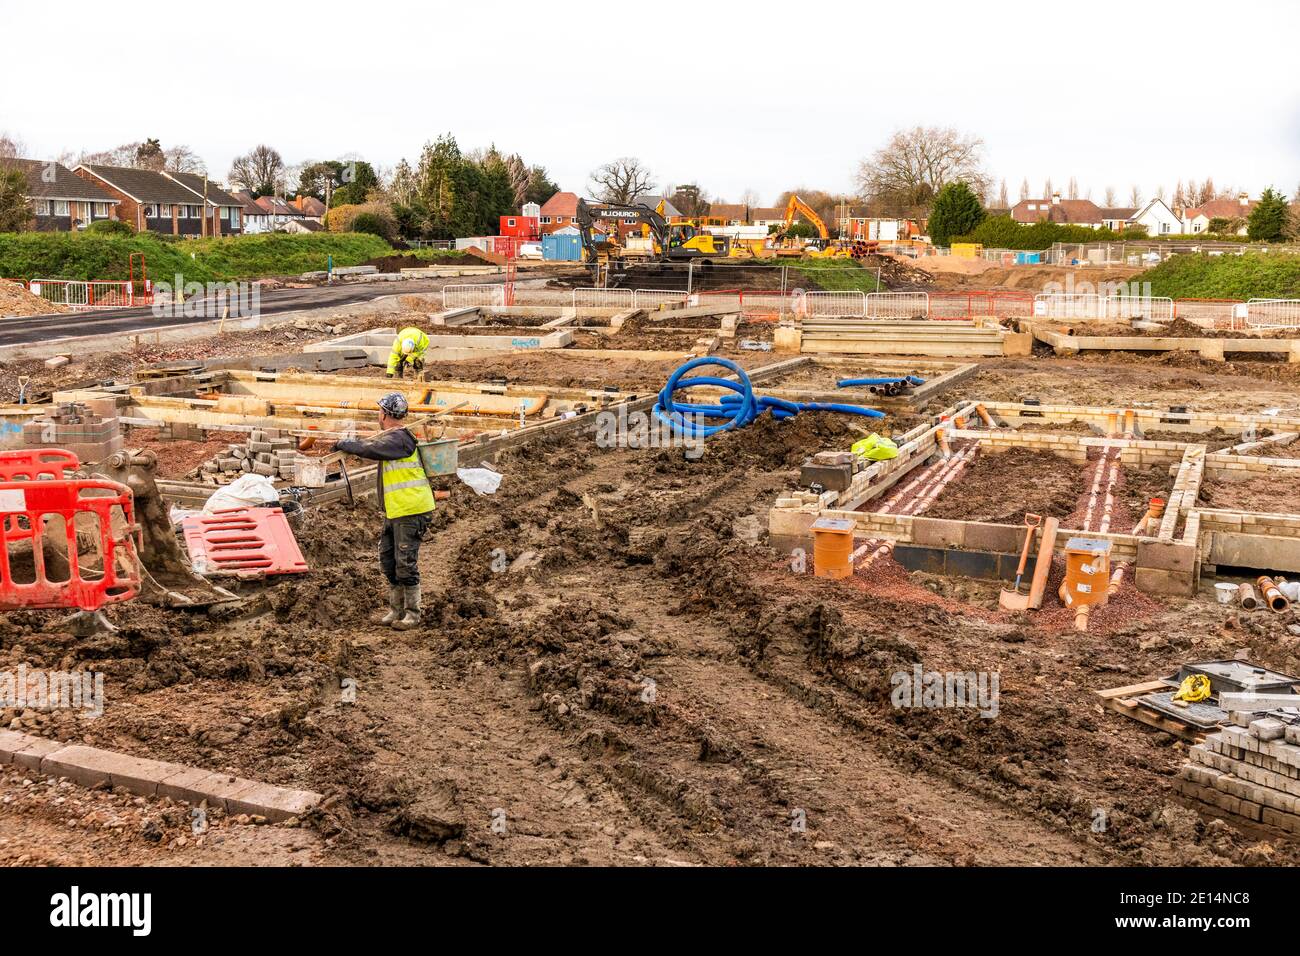 Builders on a muddy site laying foundations for new homes in Kingsholm, Gloucester UK Stock Photo